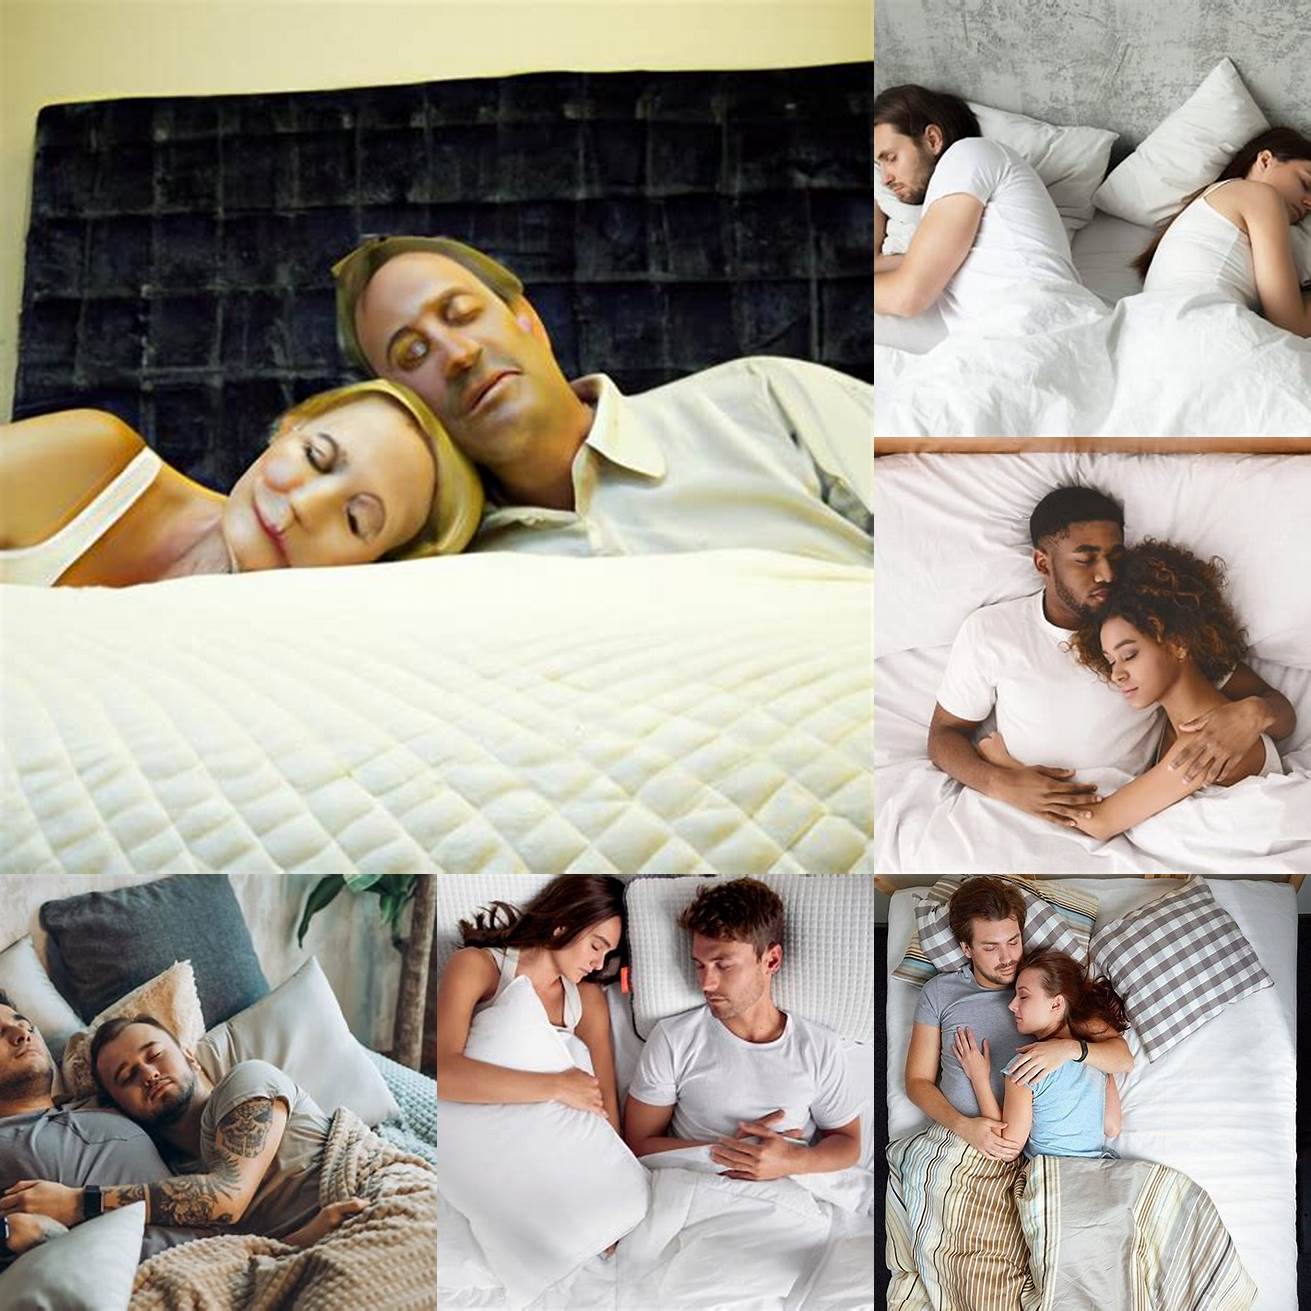 Provides ample space for couples to sleep comfortably